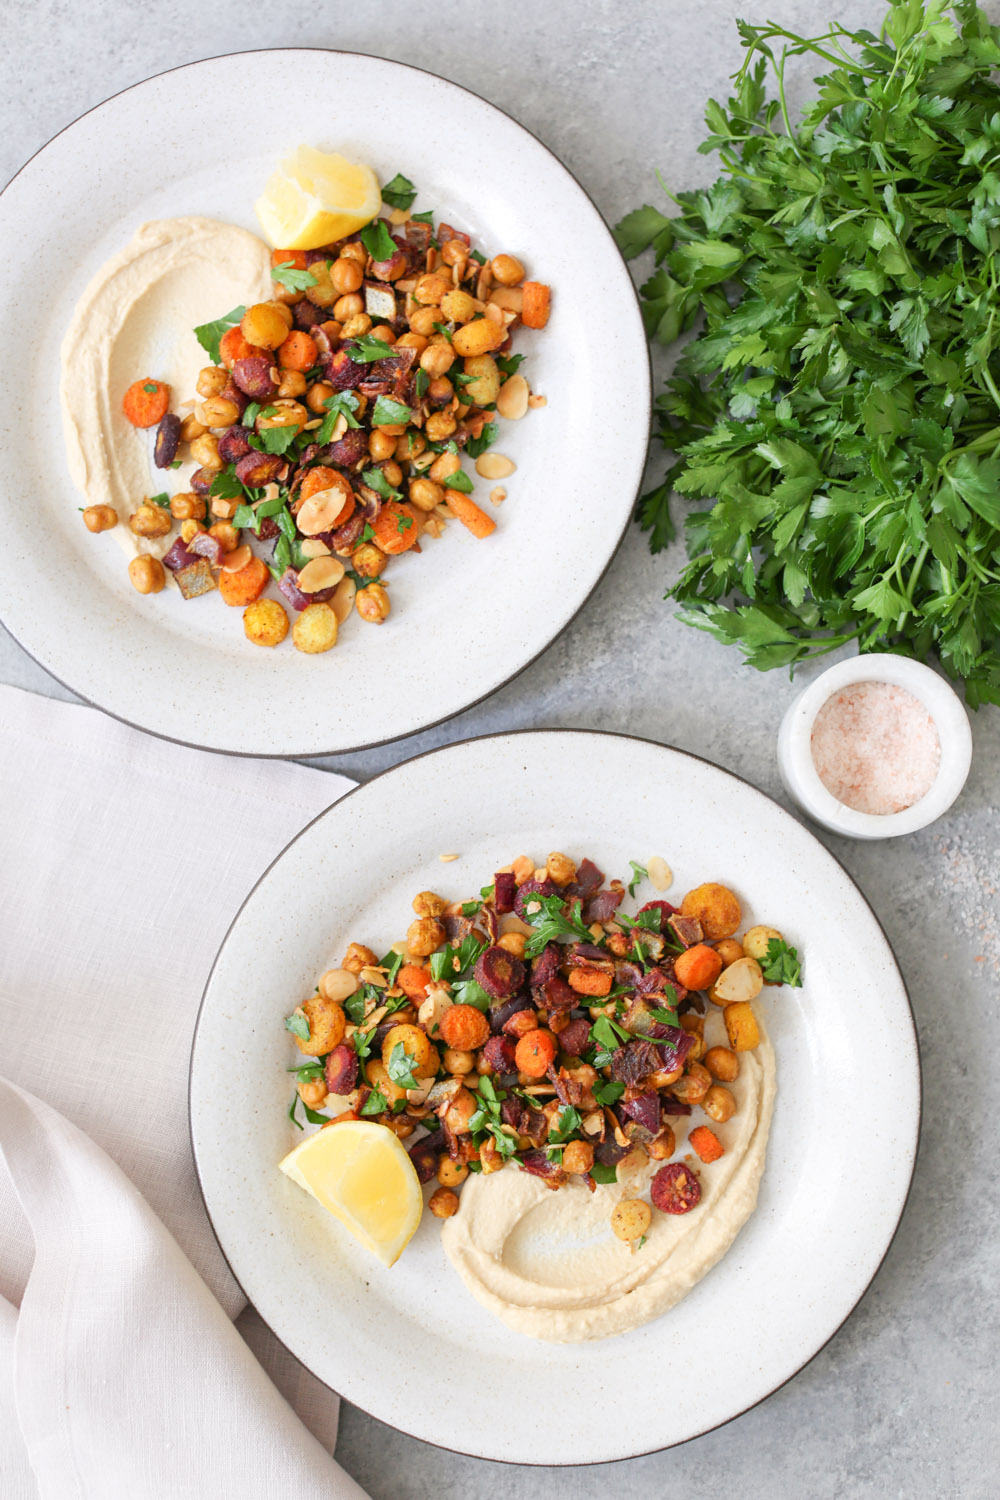 https://domesticate-me.com/wp-content/uploads/2017/03/Moroccan-chickpea-and-carrot-salad-1.jpg